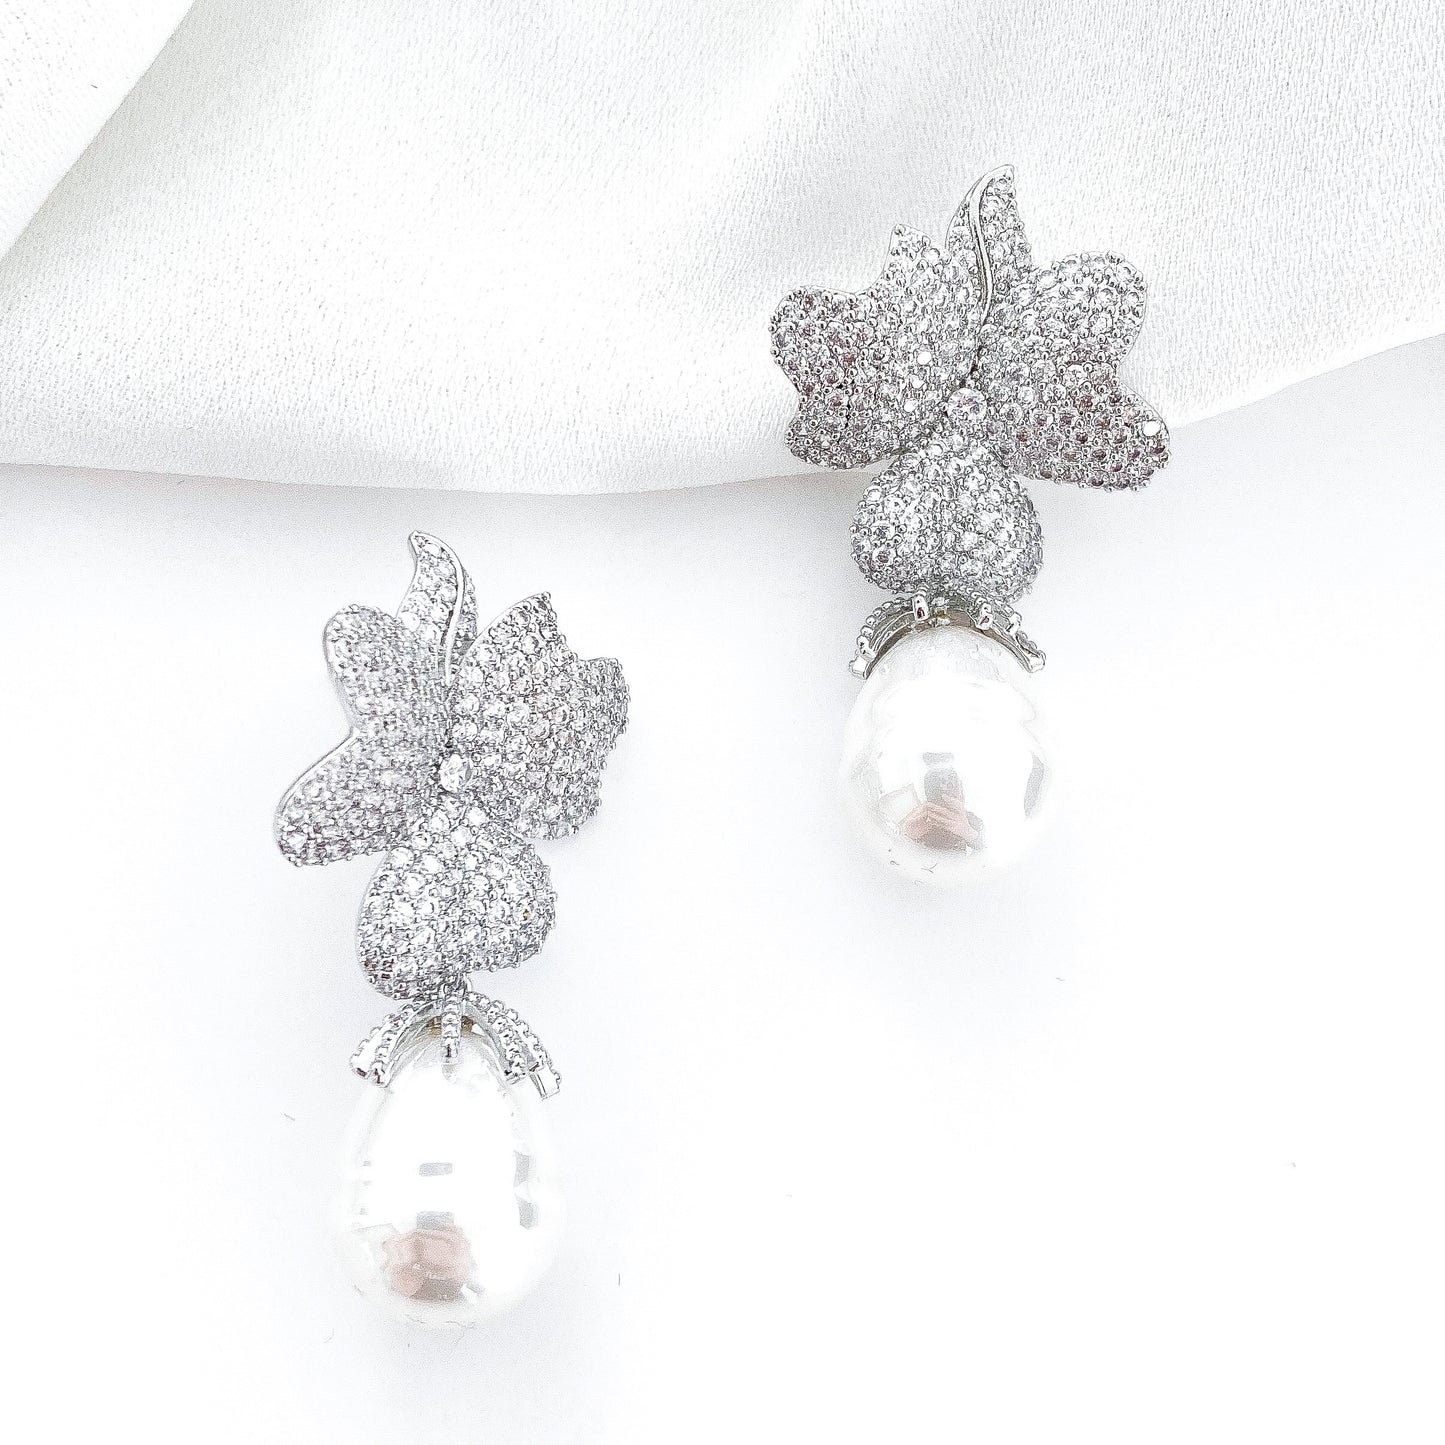 Deluxe Baroque Pearl and Crystal Flower Earrings